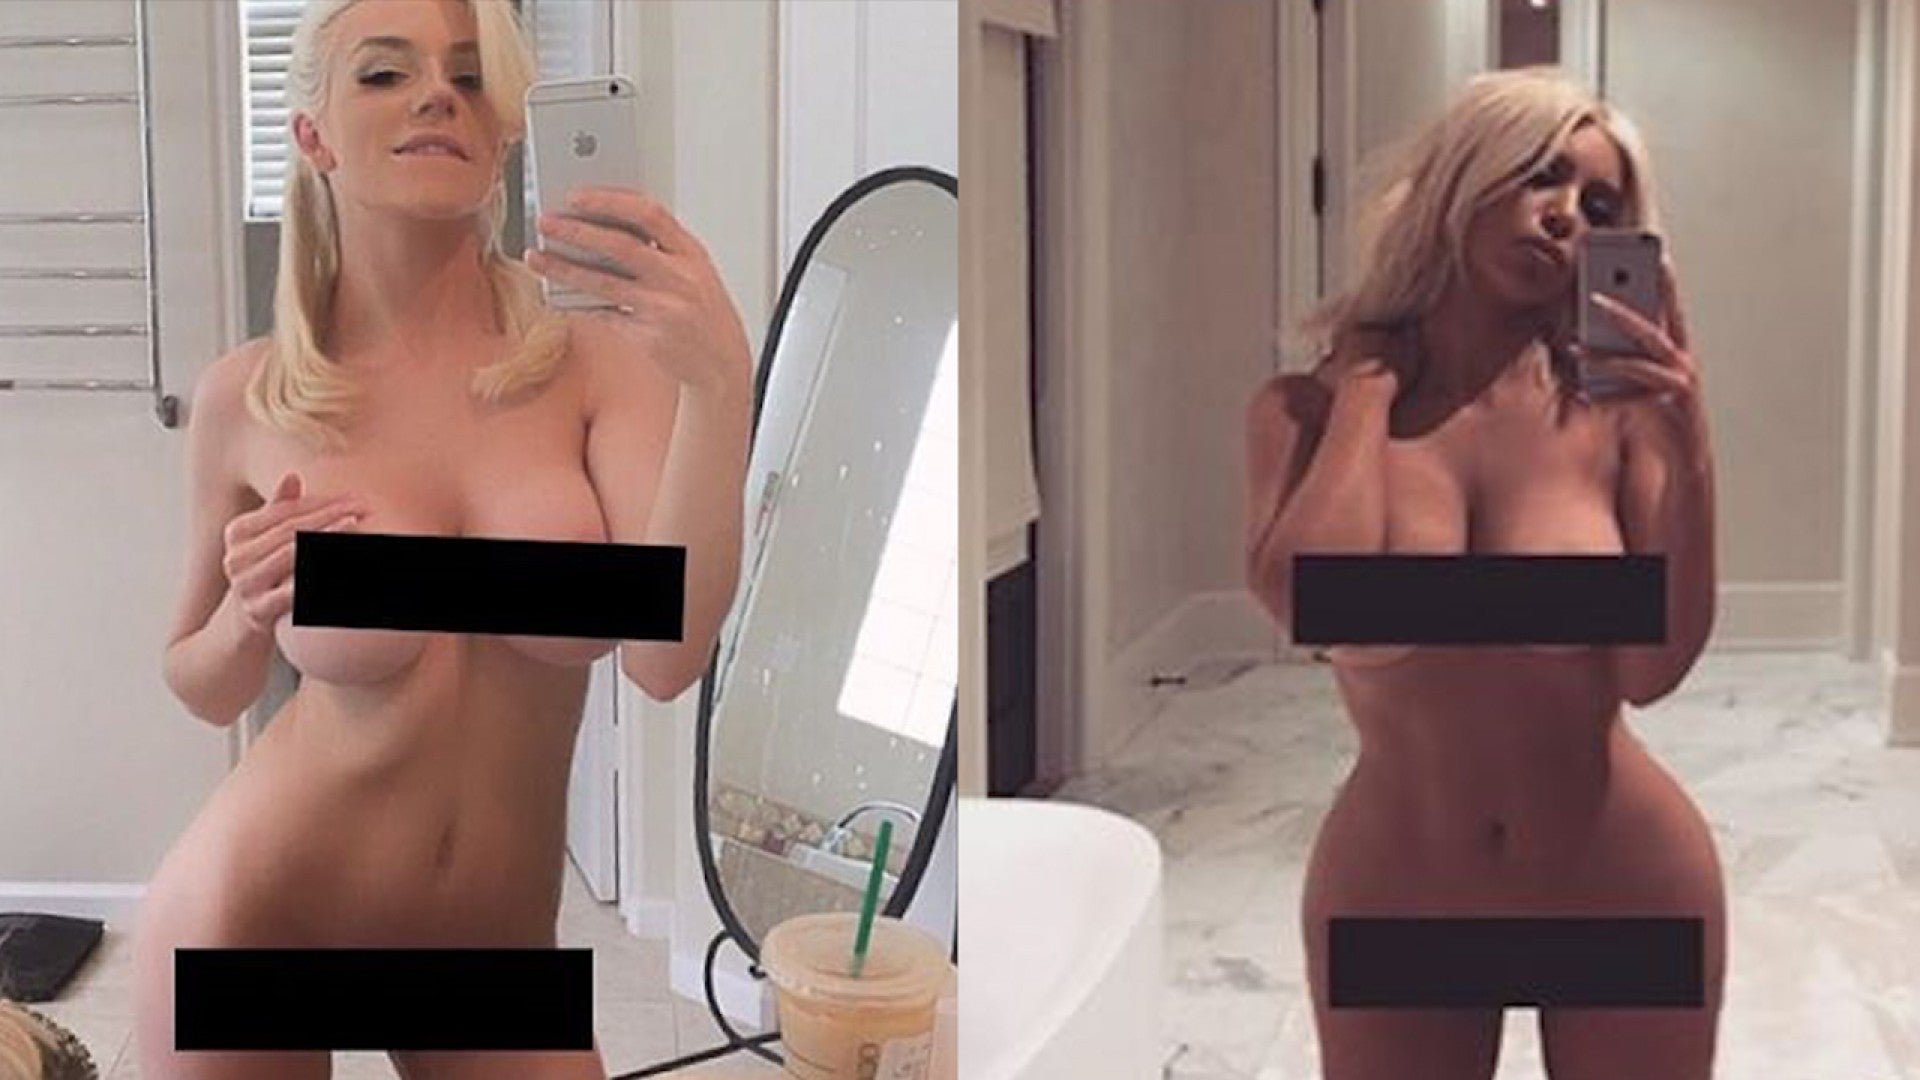 Courtney stodden nude pictures